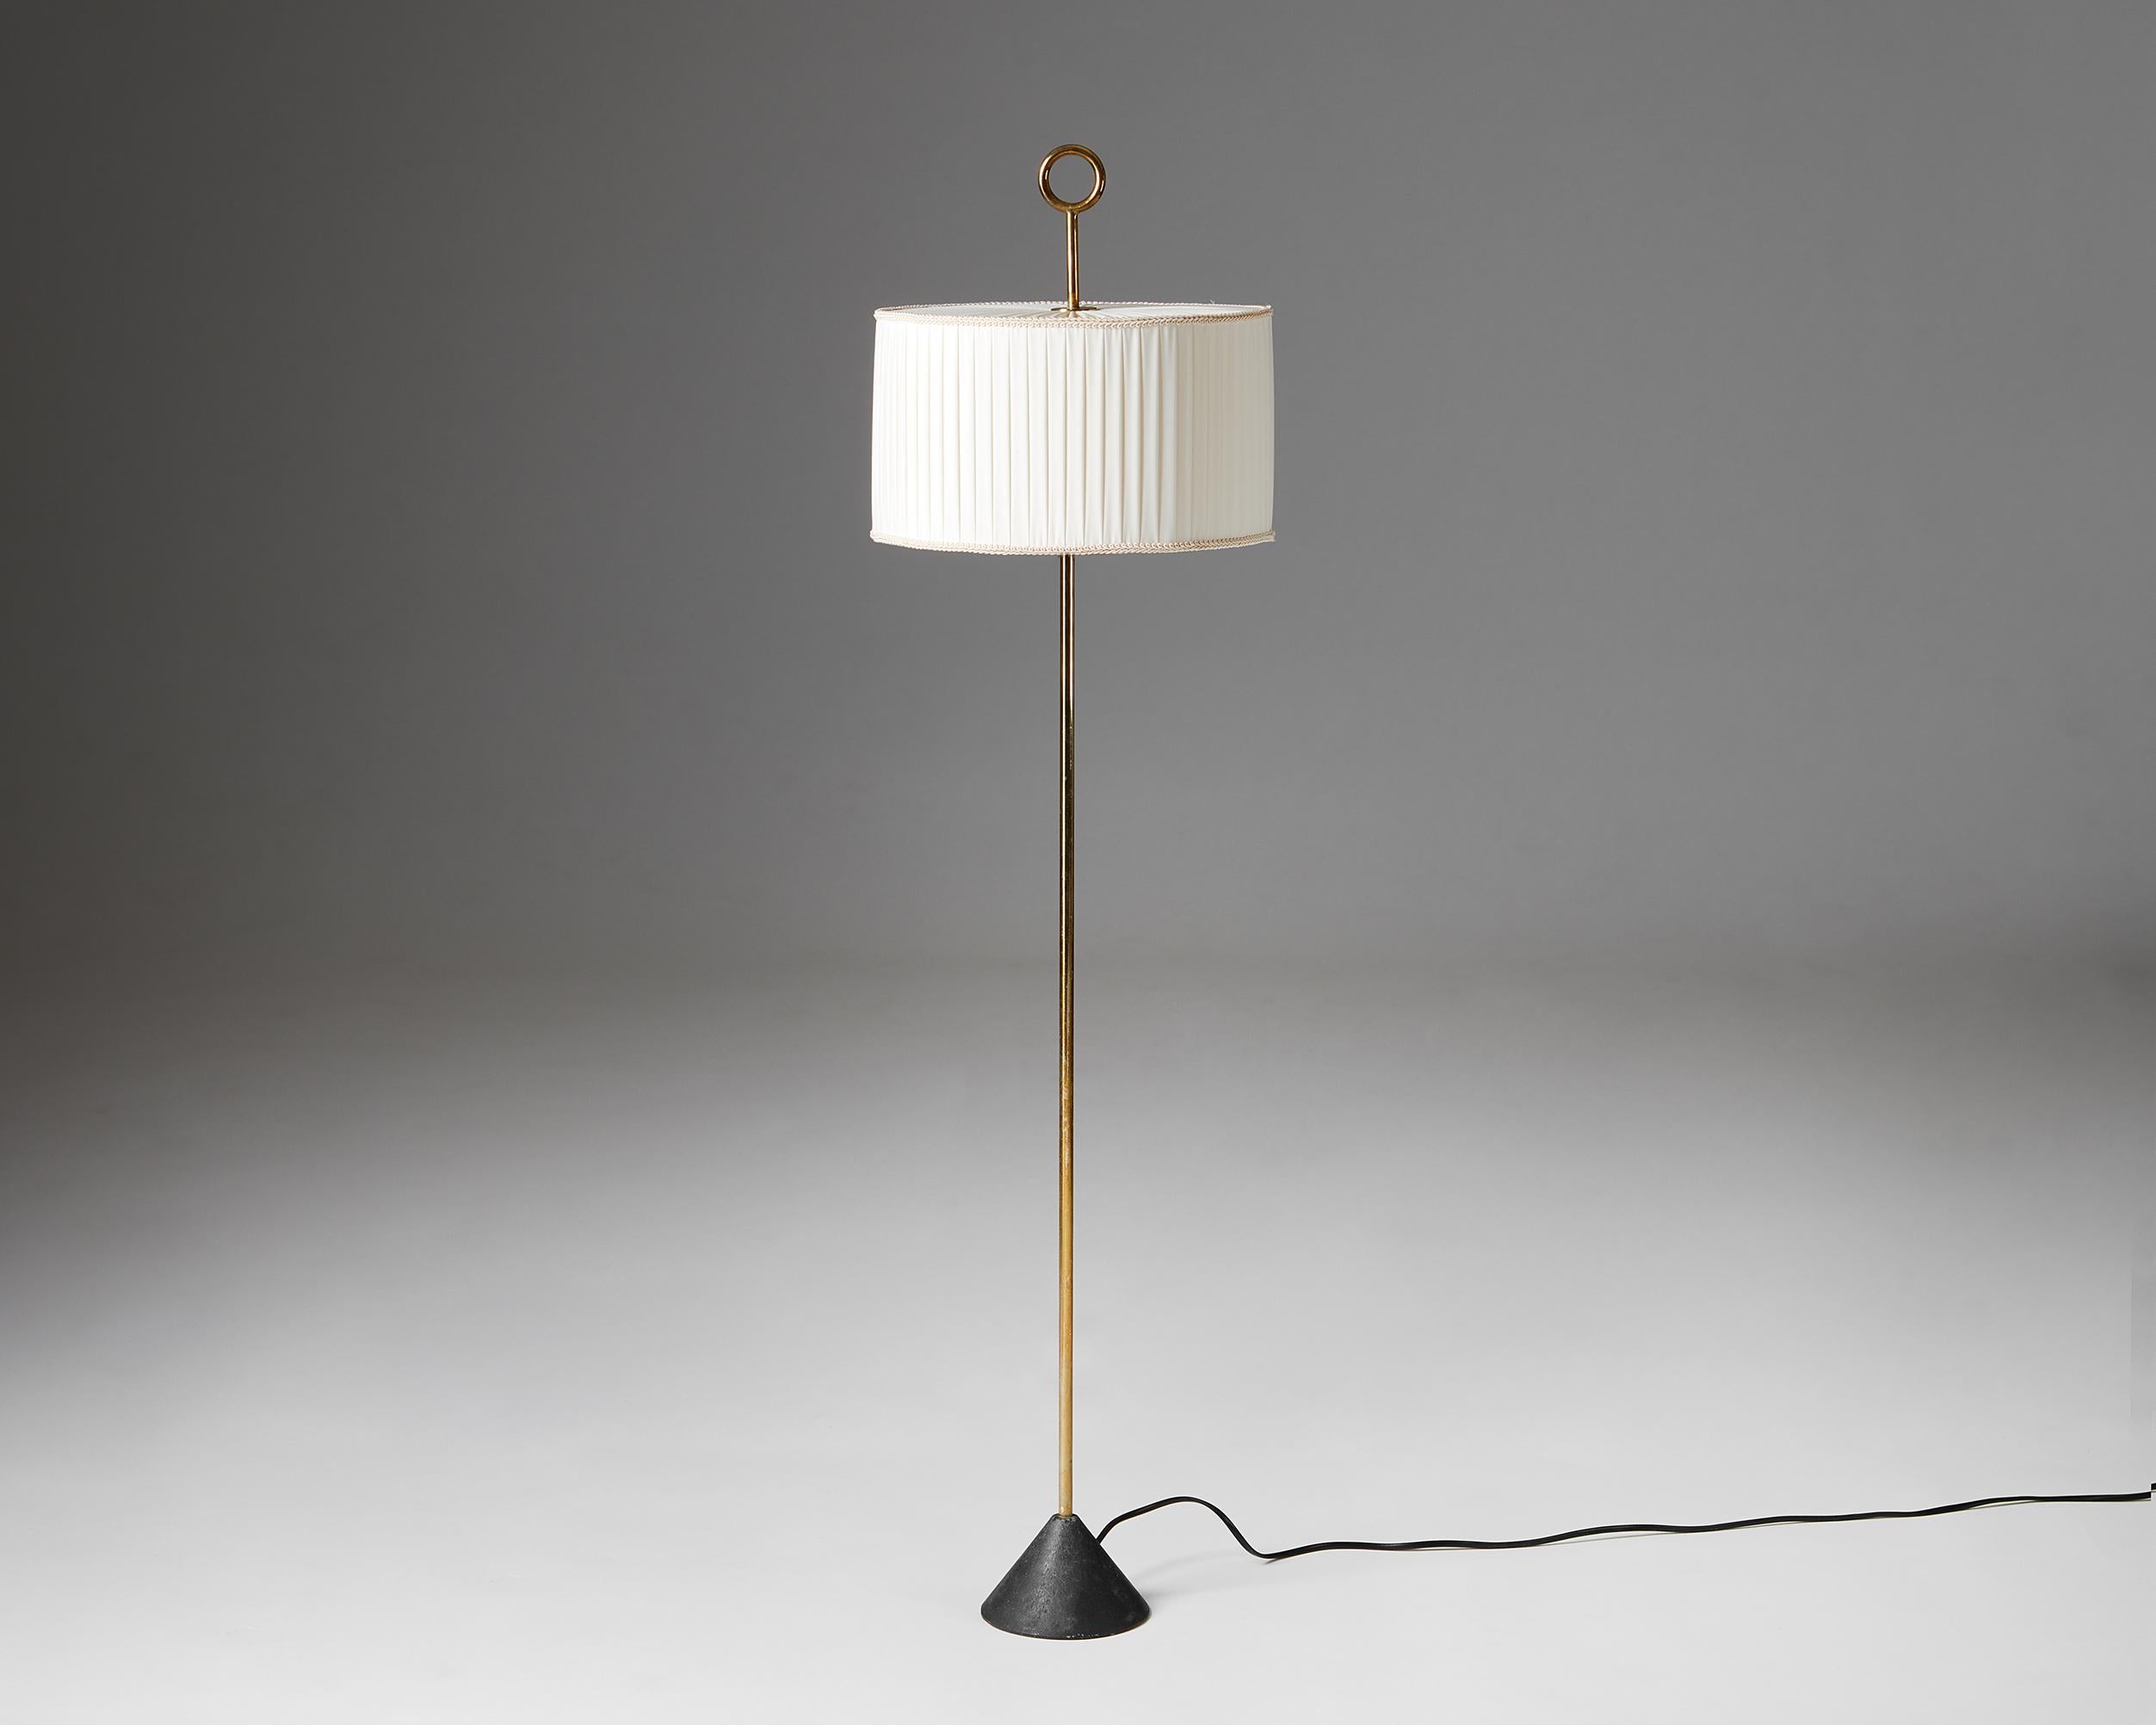 Floor lamp designed by Hans-Agne Jakobsson,
Sweden. 1960s.

Brass with fabric shade.

Active between the 1950s and 1970s—in the golden age of Scandinavian design—Swedish interior decorator and furniture designer Hans-Agne Jakobsson is best